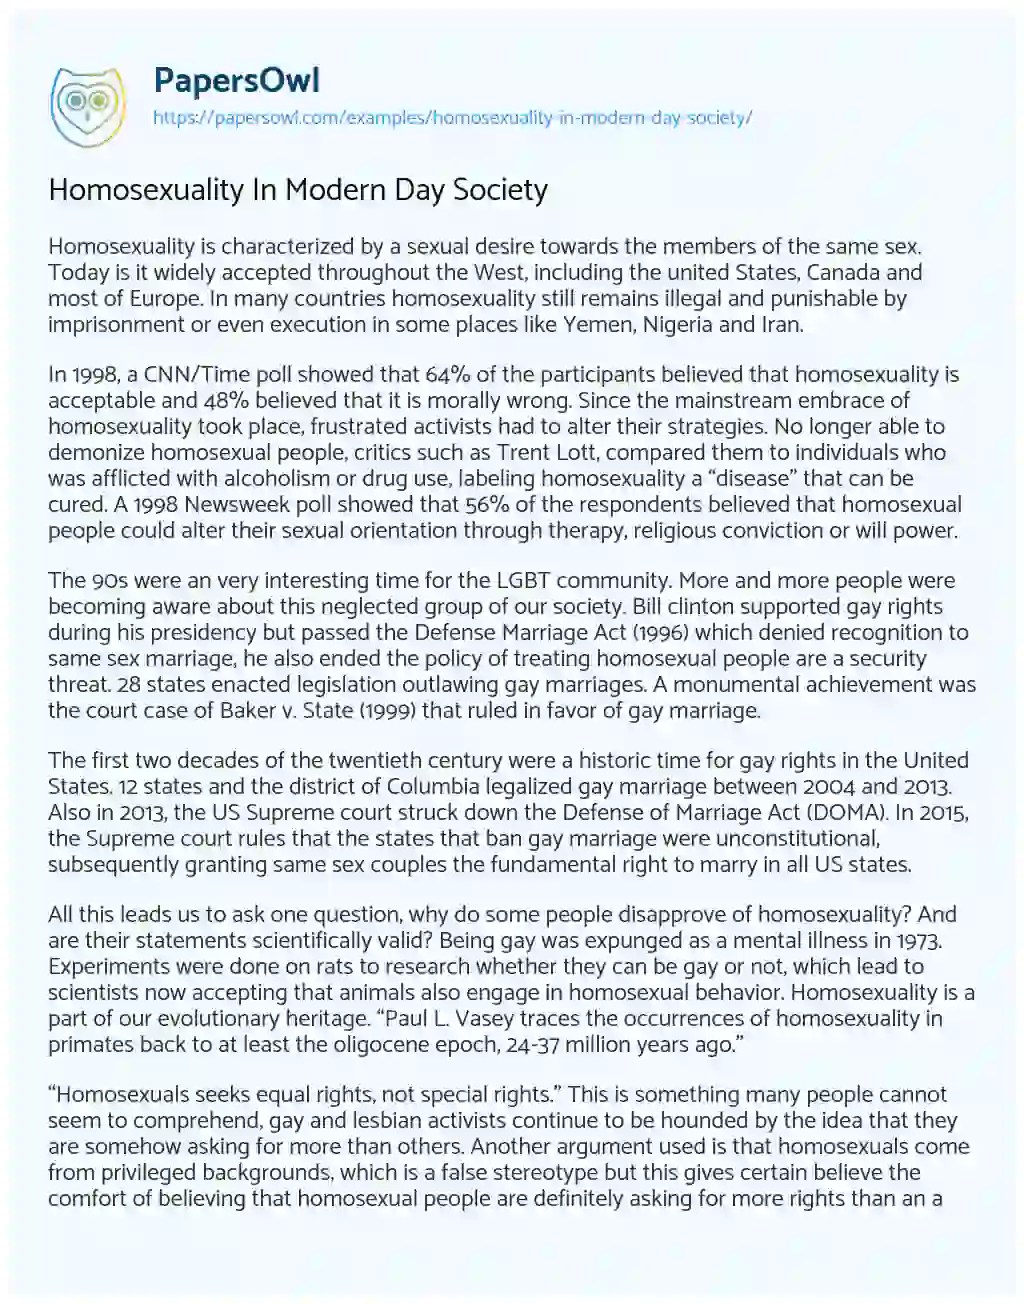 Essay on Homosexuality in Modern Day Society